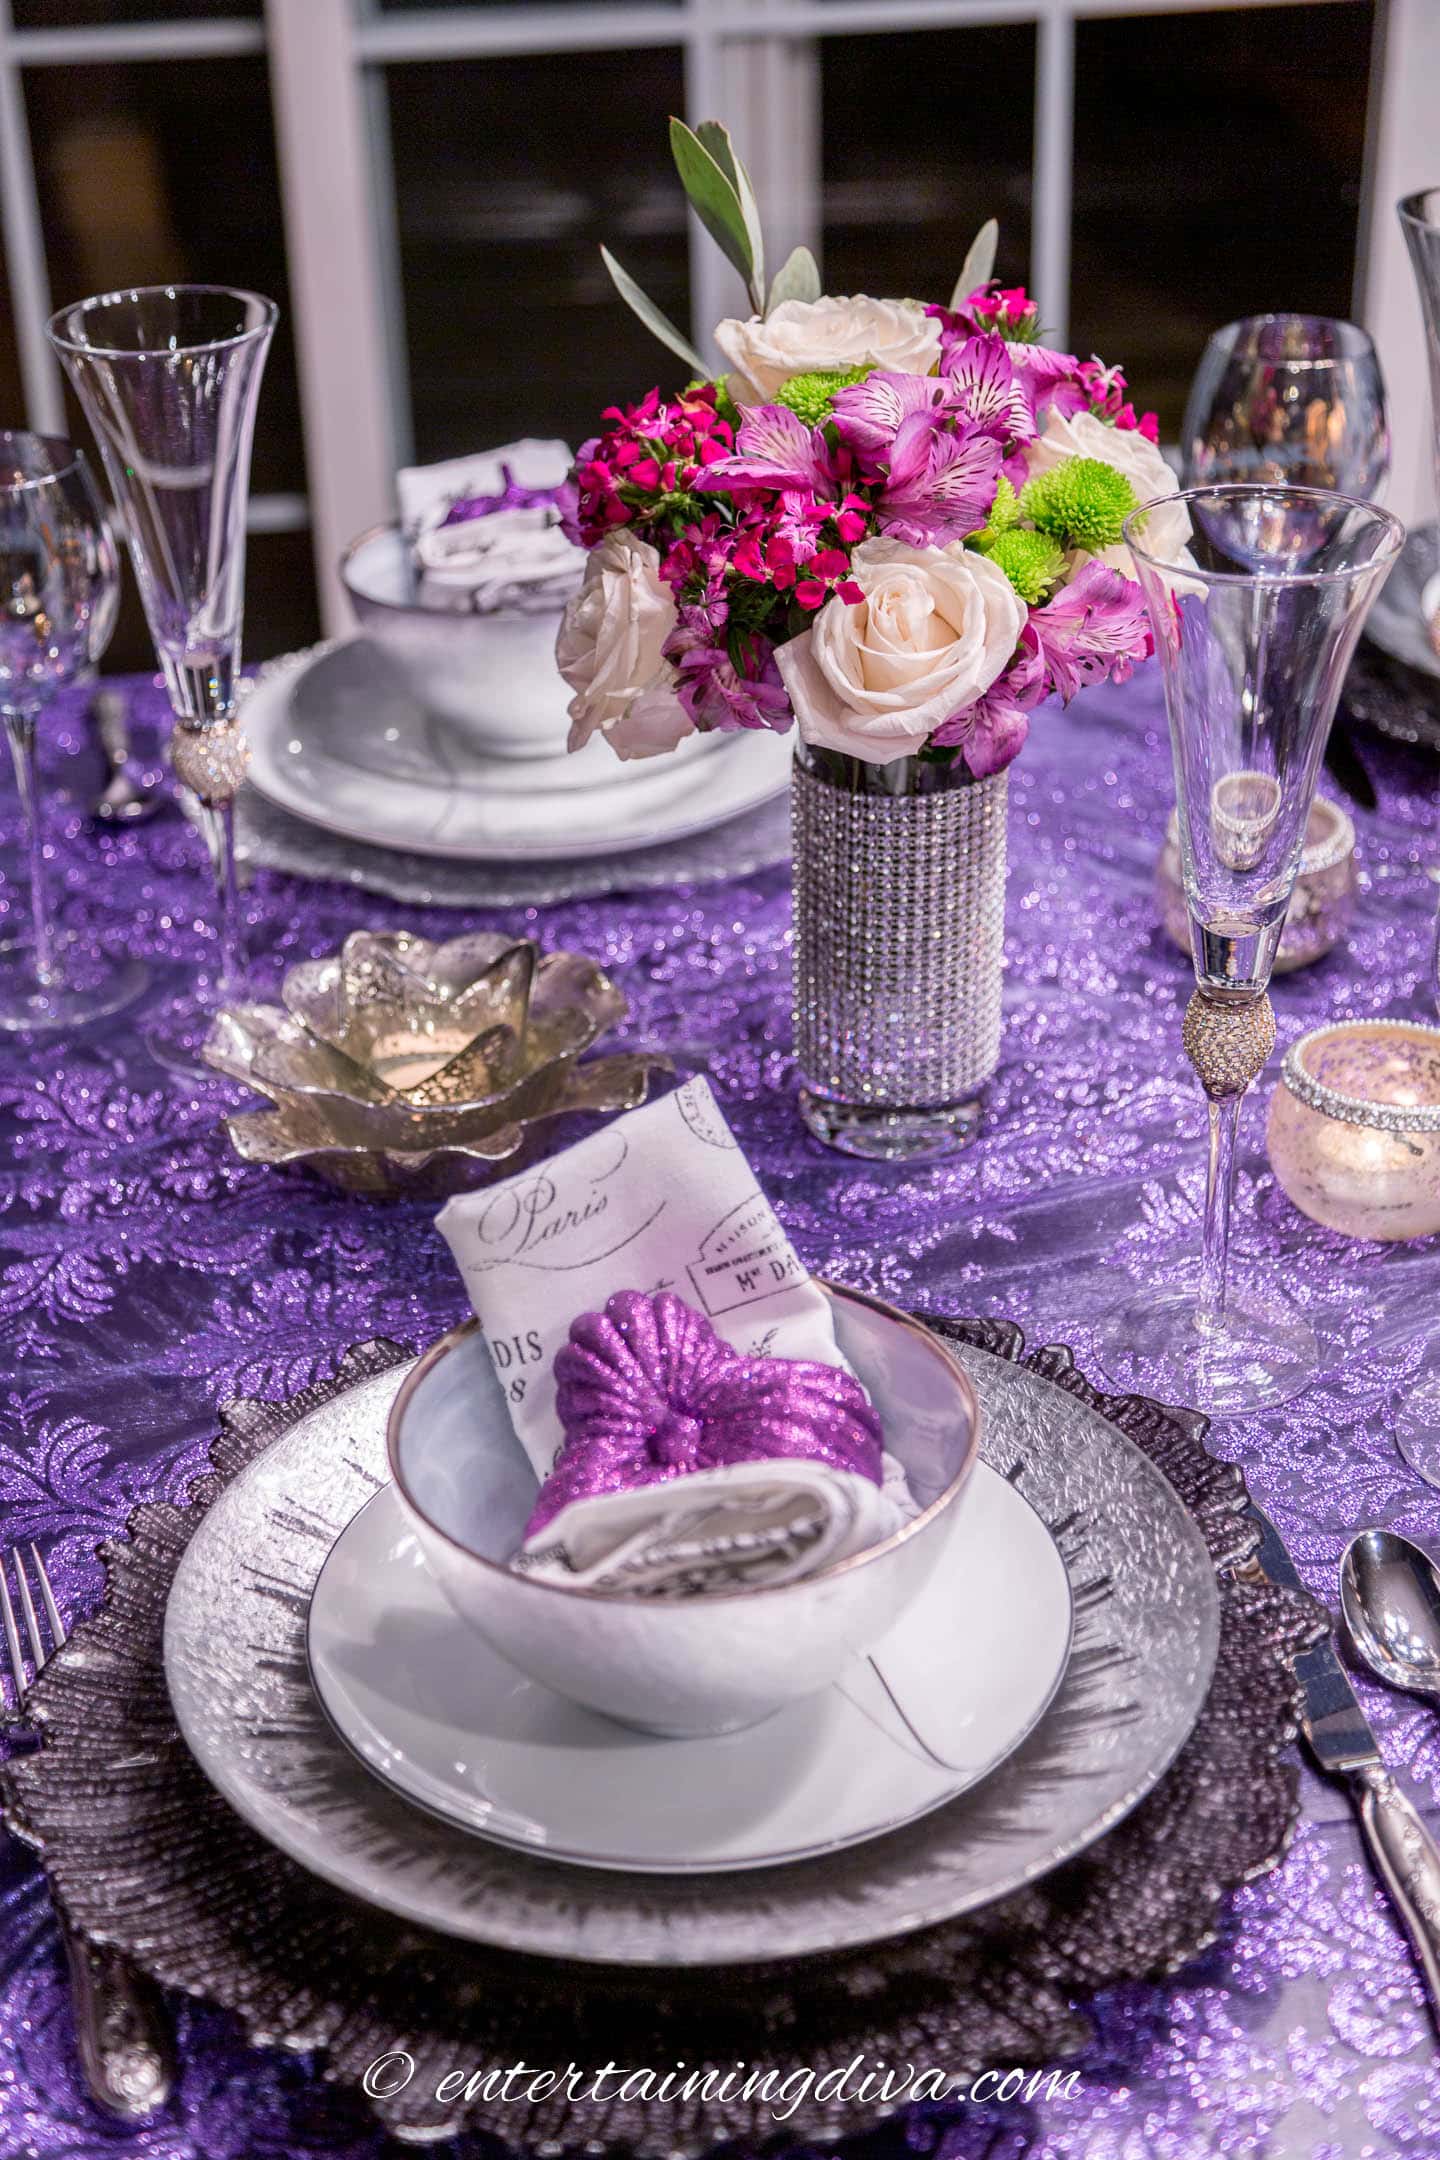 Black and silver place setting with a purple pumpkin on a purple lace tablecloth in front of a small flower arrangement